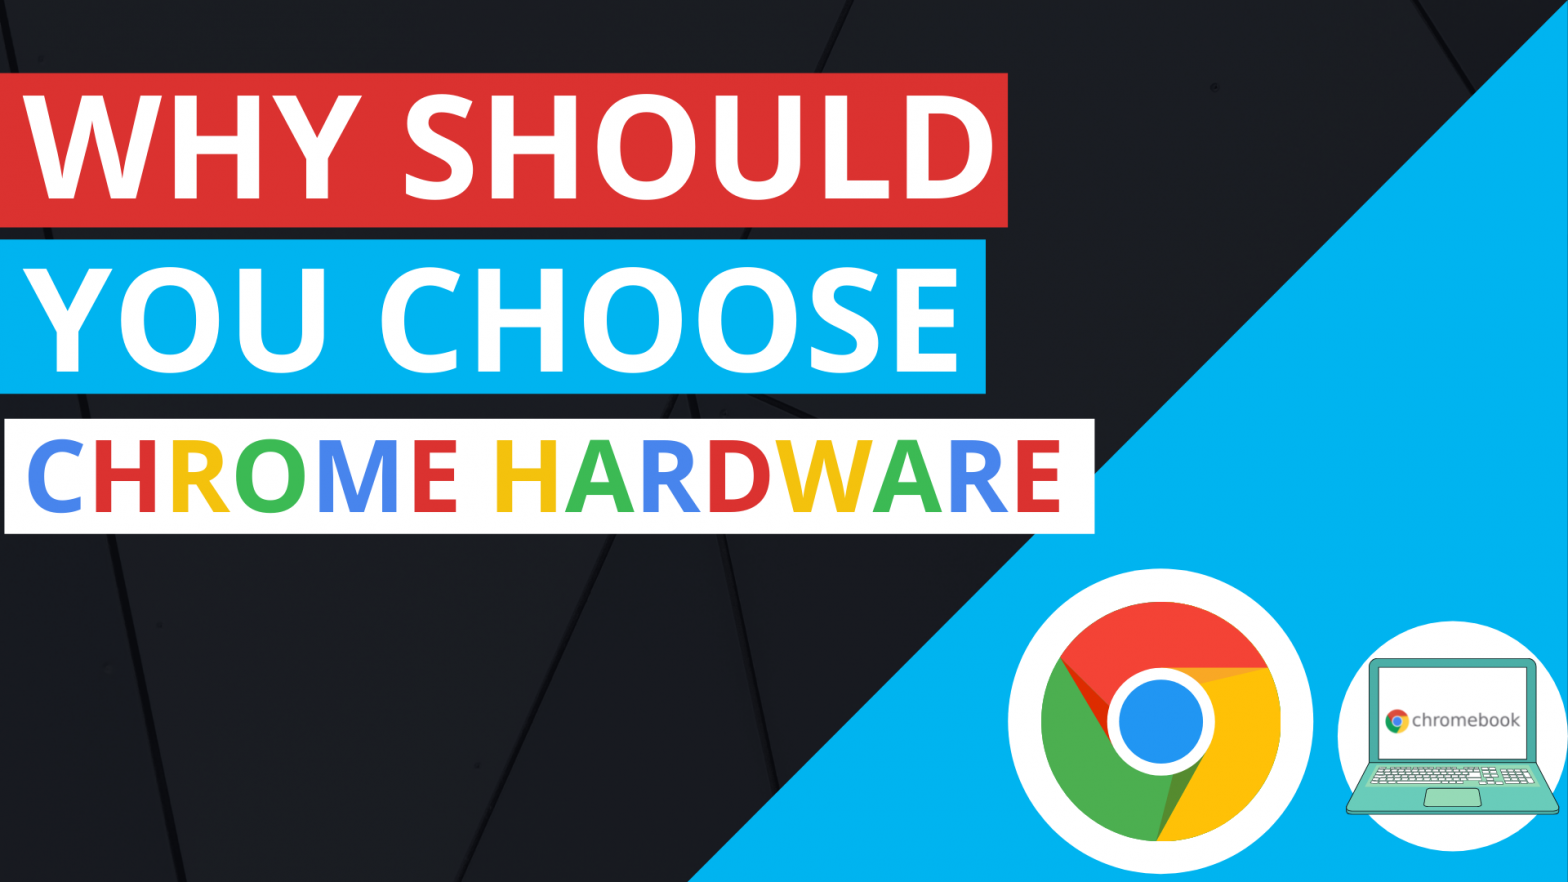 Why Should You Choose Chrome Hardware